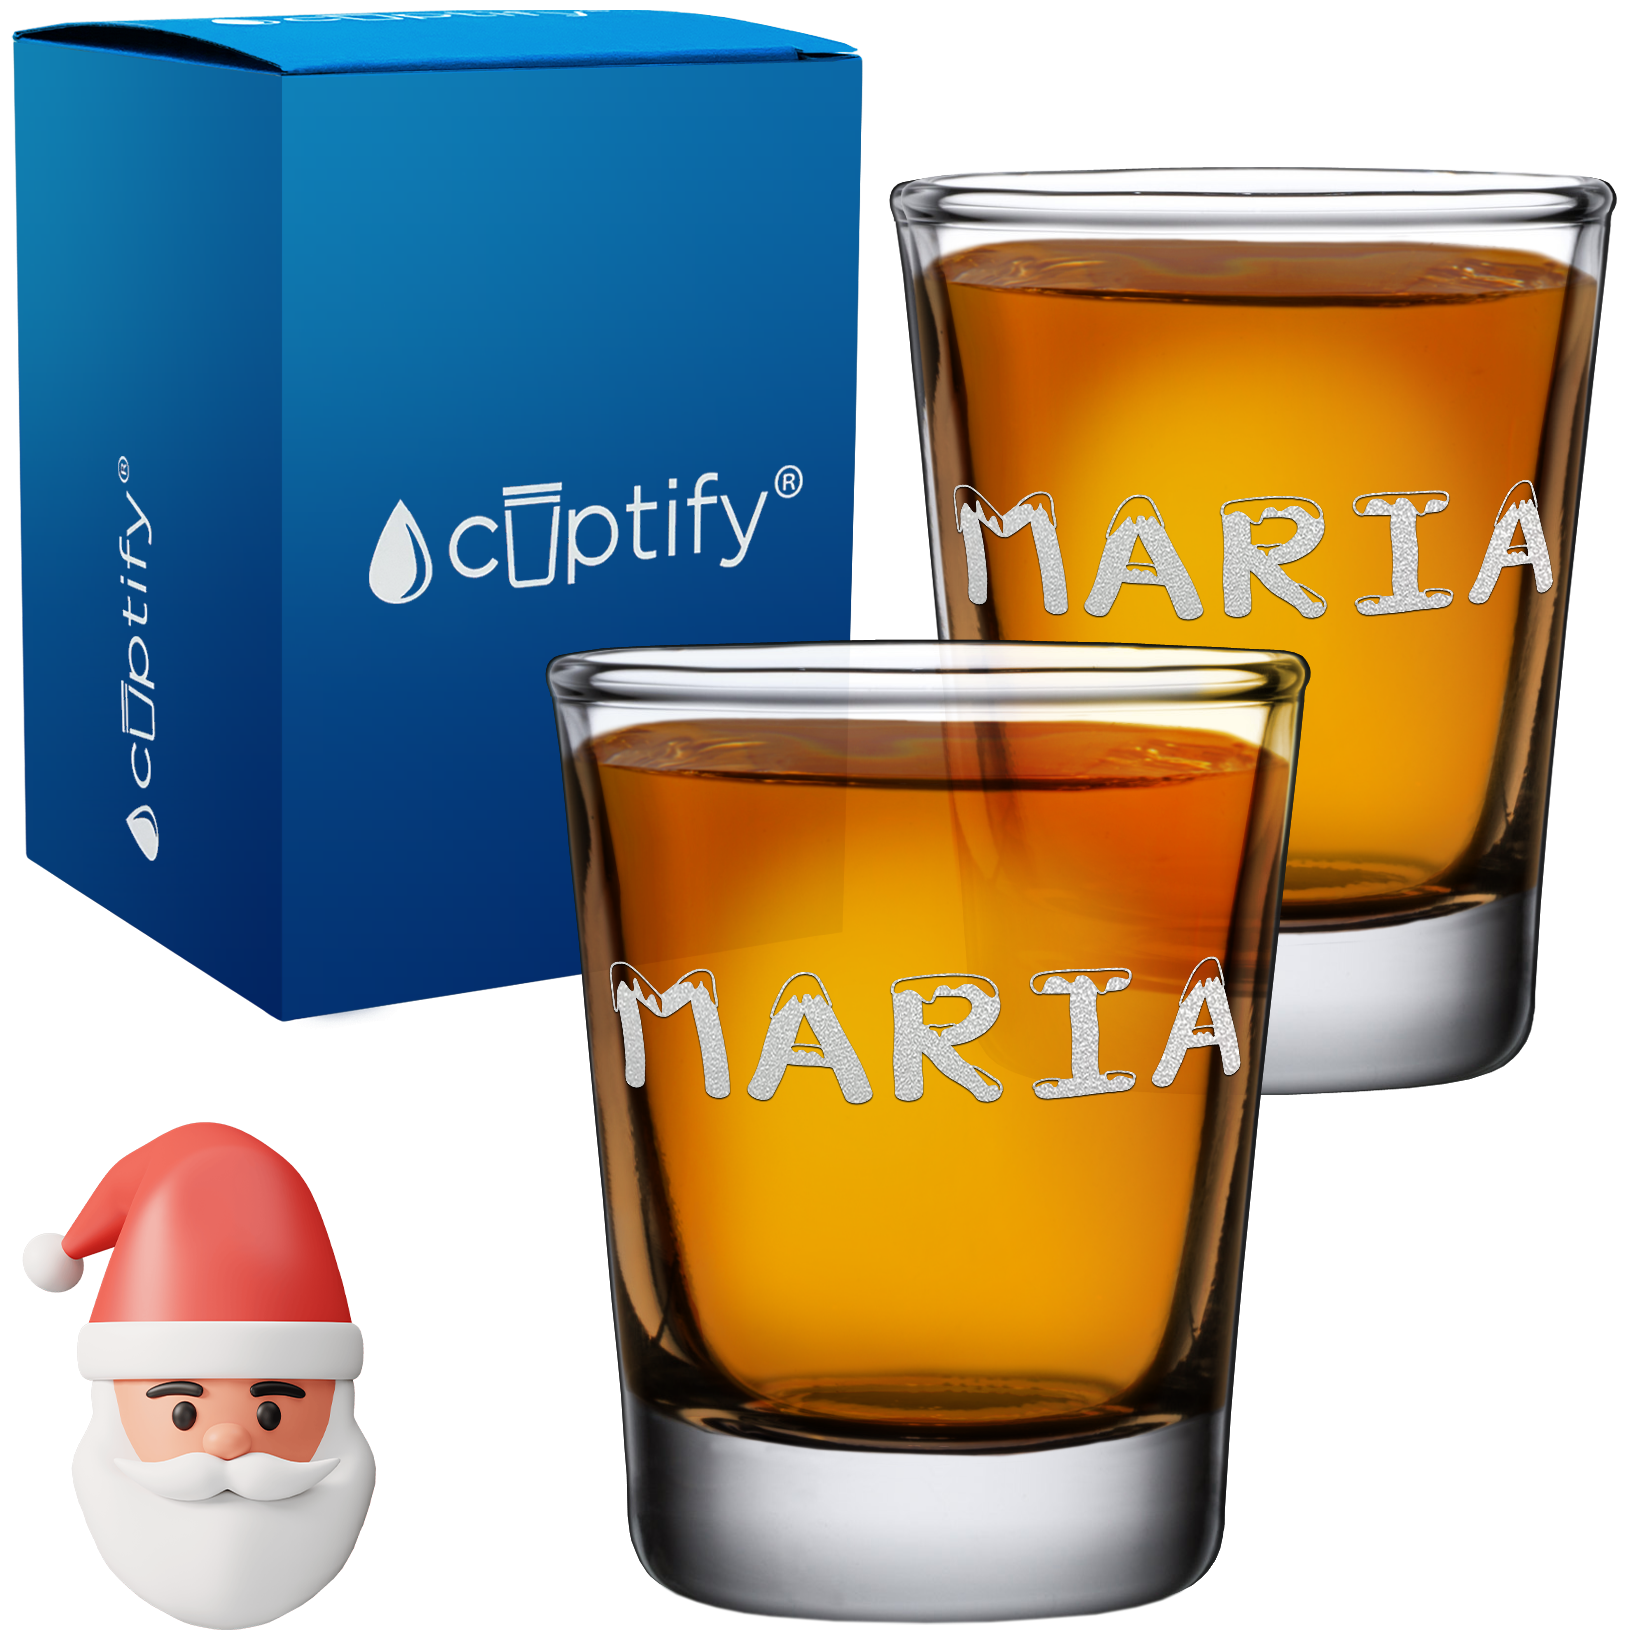 Personalized Snowy Christmas Font 2oz Shot Glasses - Set of 2